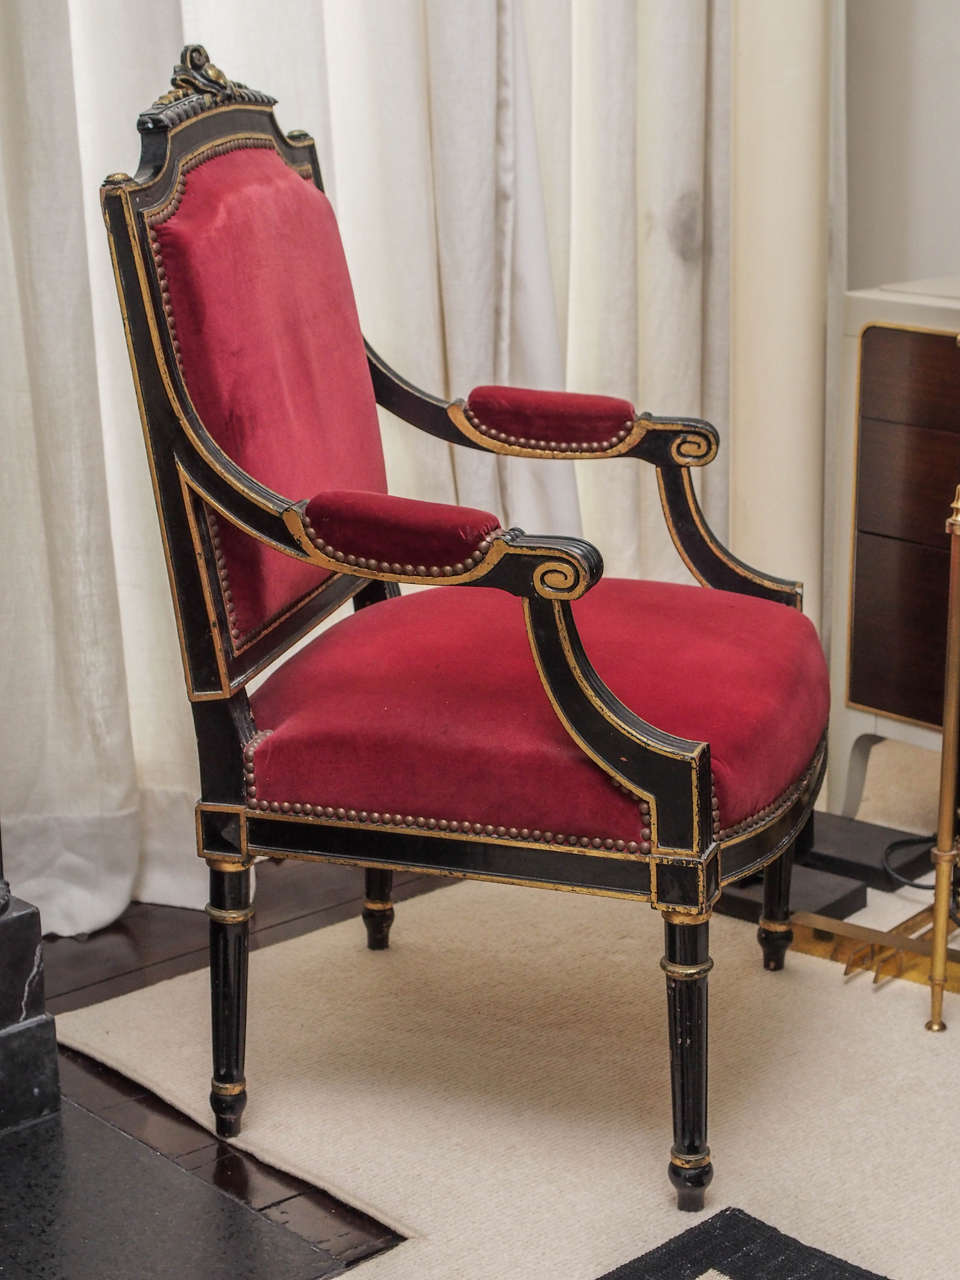 Two ebonized armchairs with gilt details throughout; red velvet upholstery with brass nailheads.